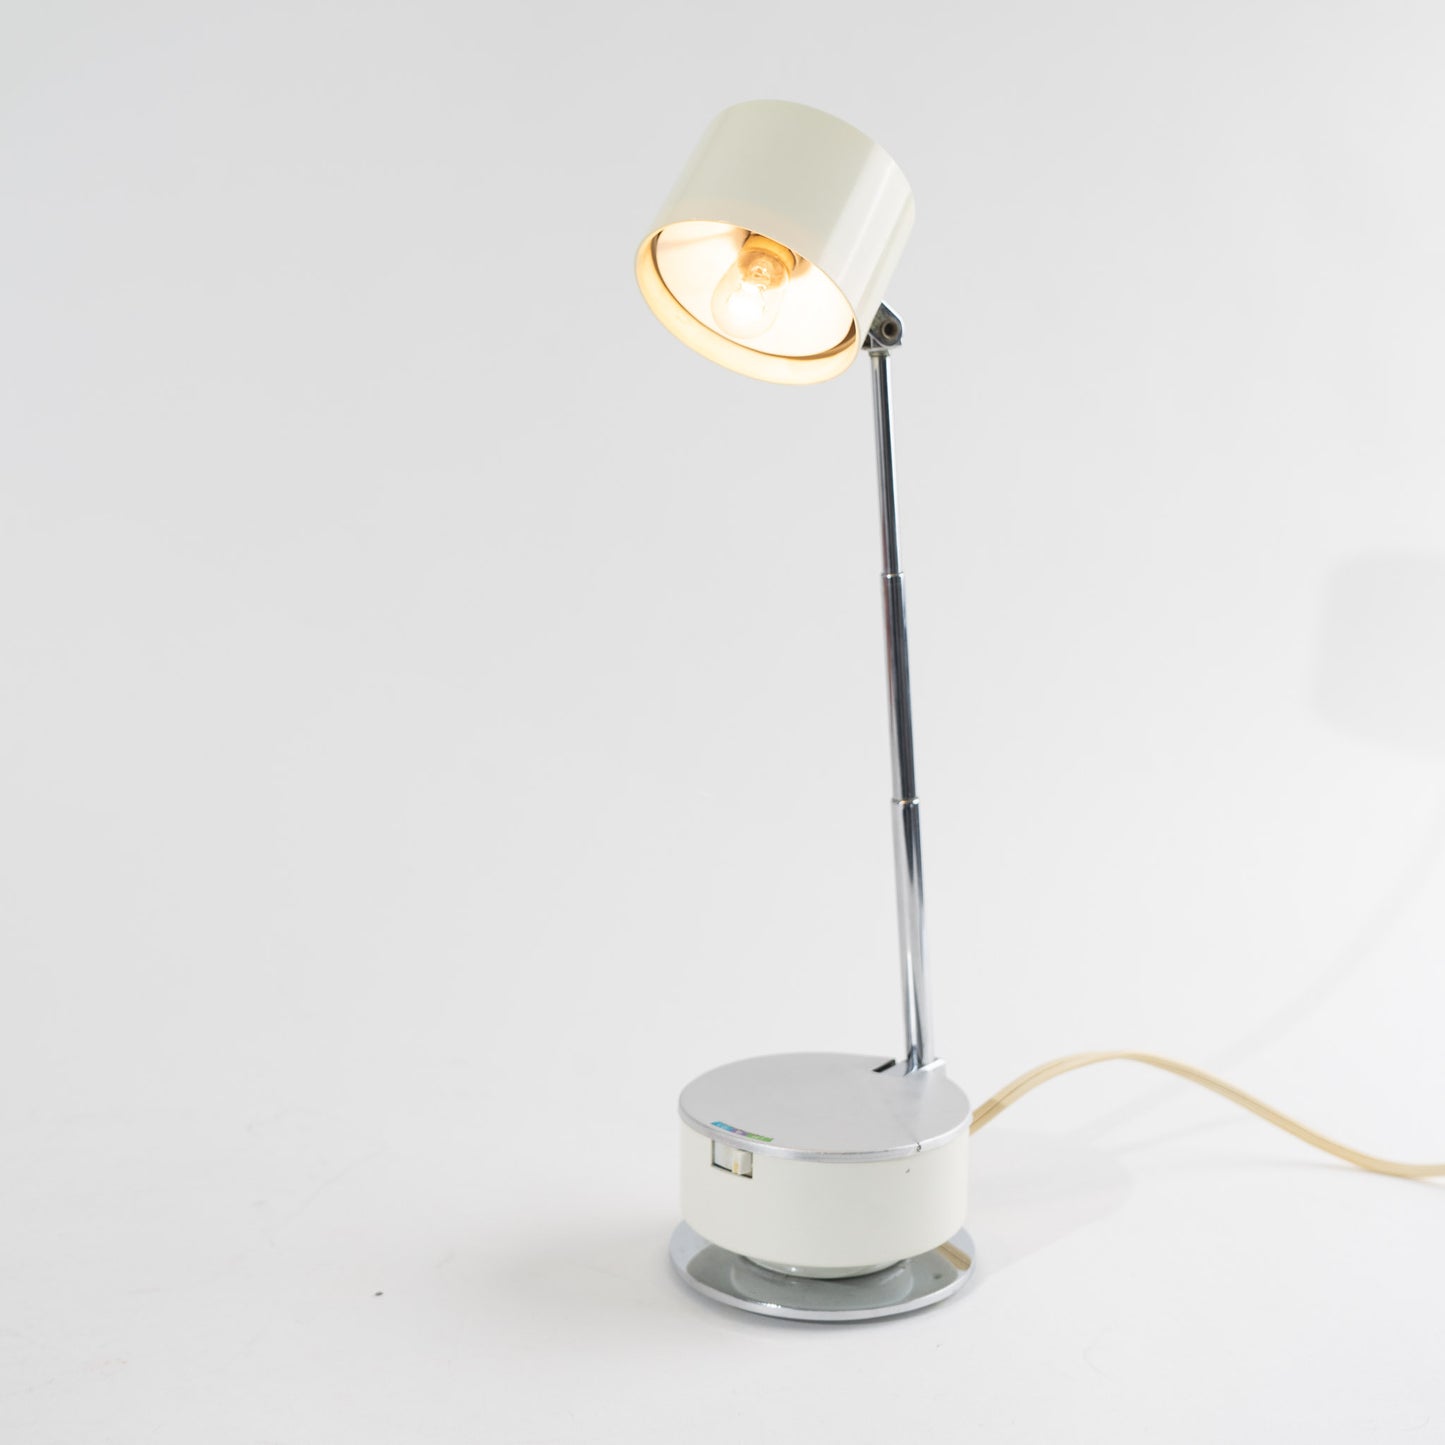 Load image into Gallery viewer, Vintage Japanese Telescoping Desk Lamp - small warm bulb
